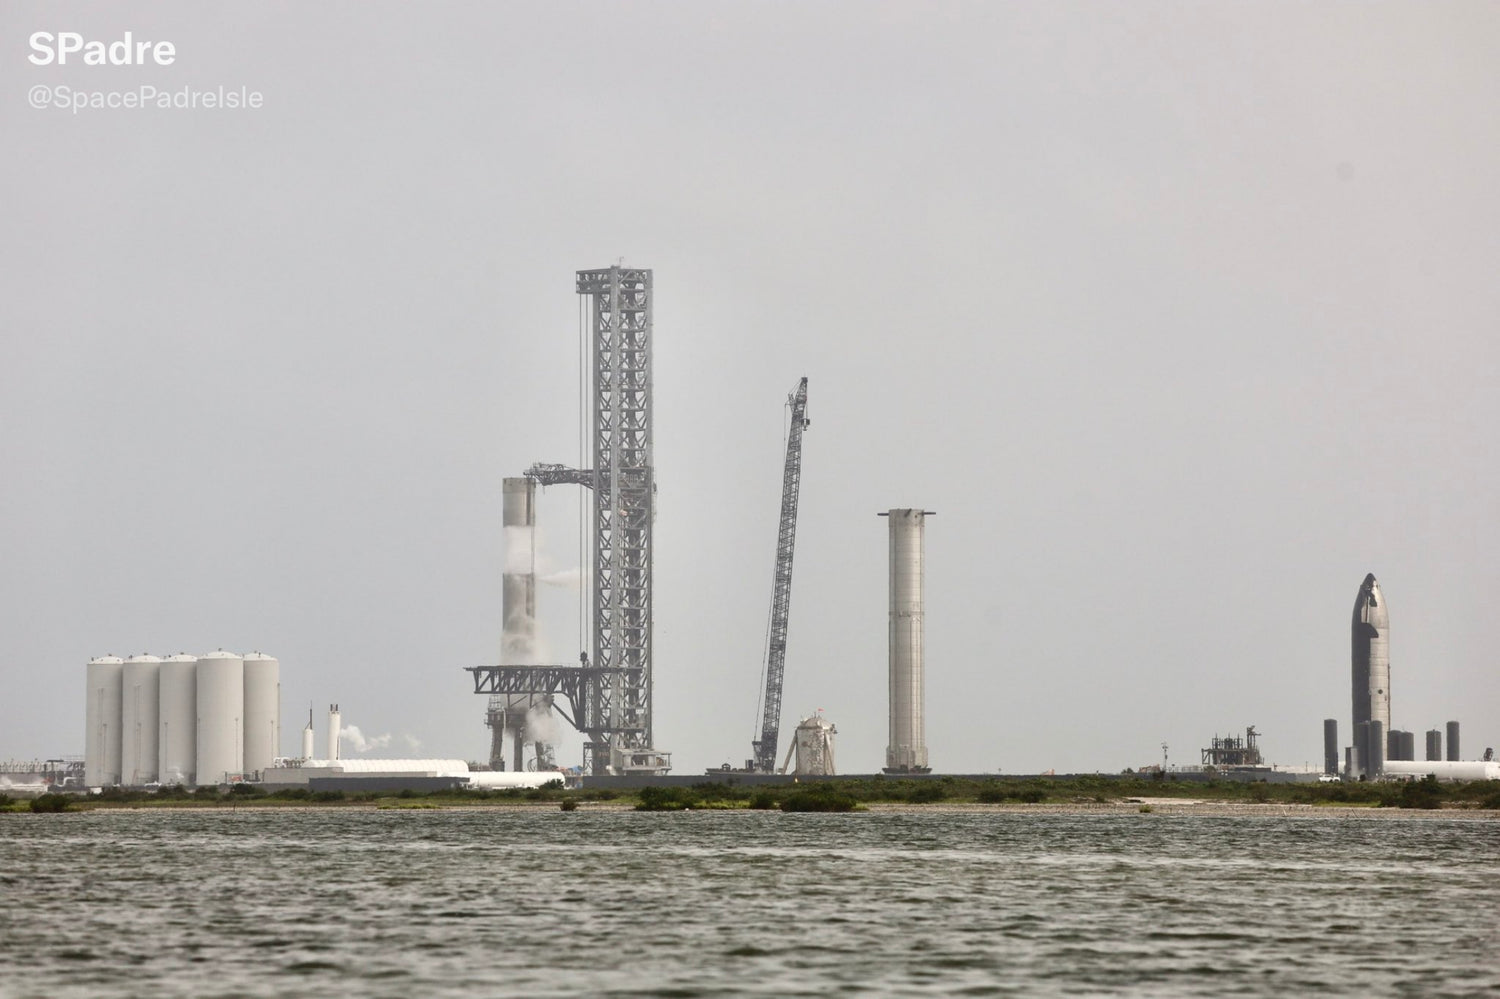 SpaceX continues Super Heavy Booster 7 testing at Boca Chica Village